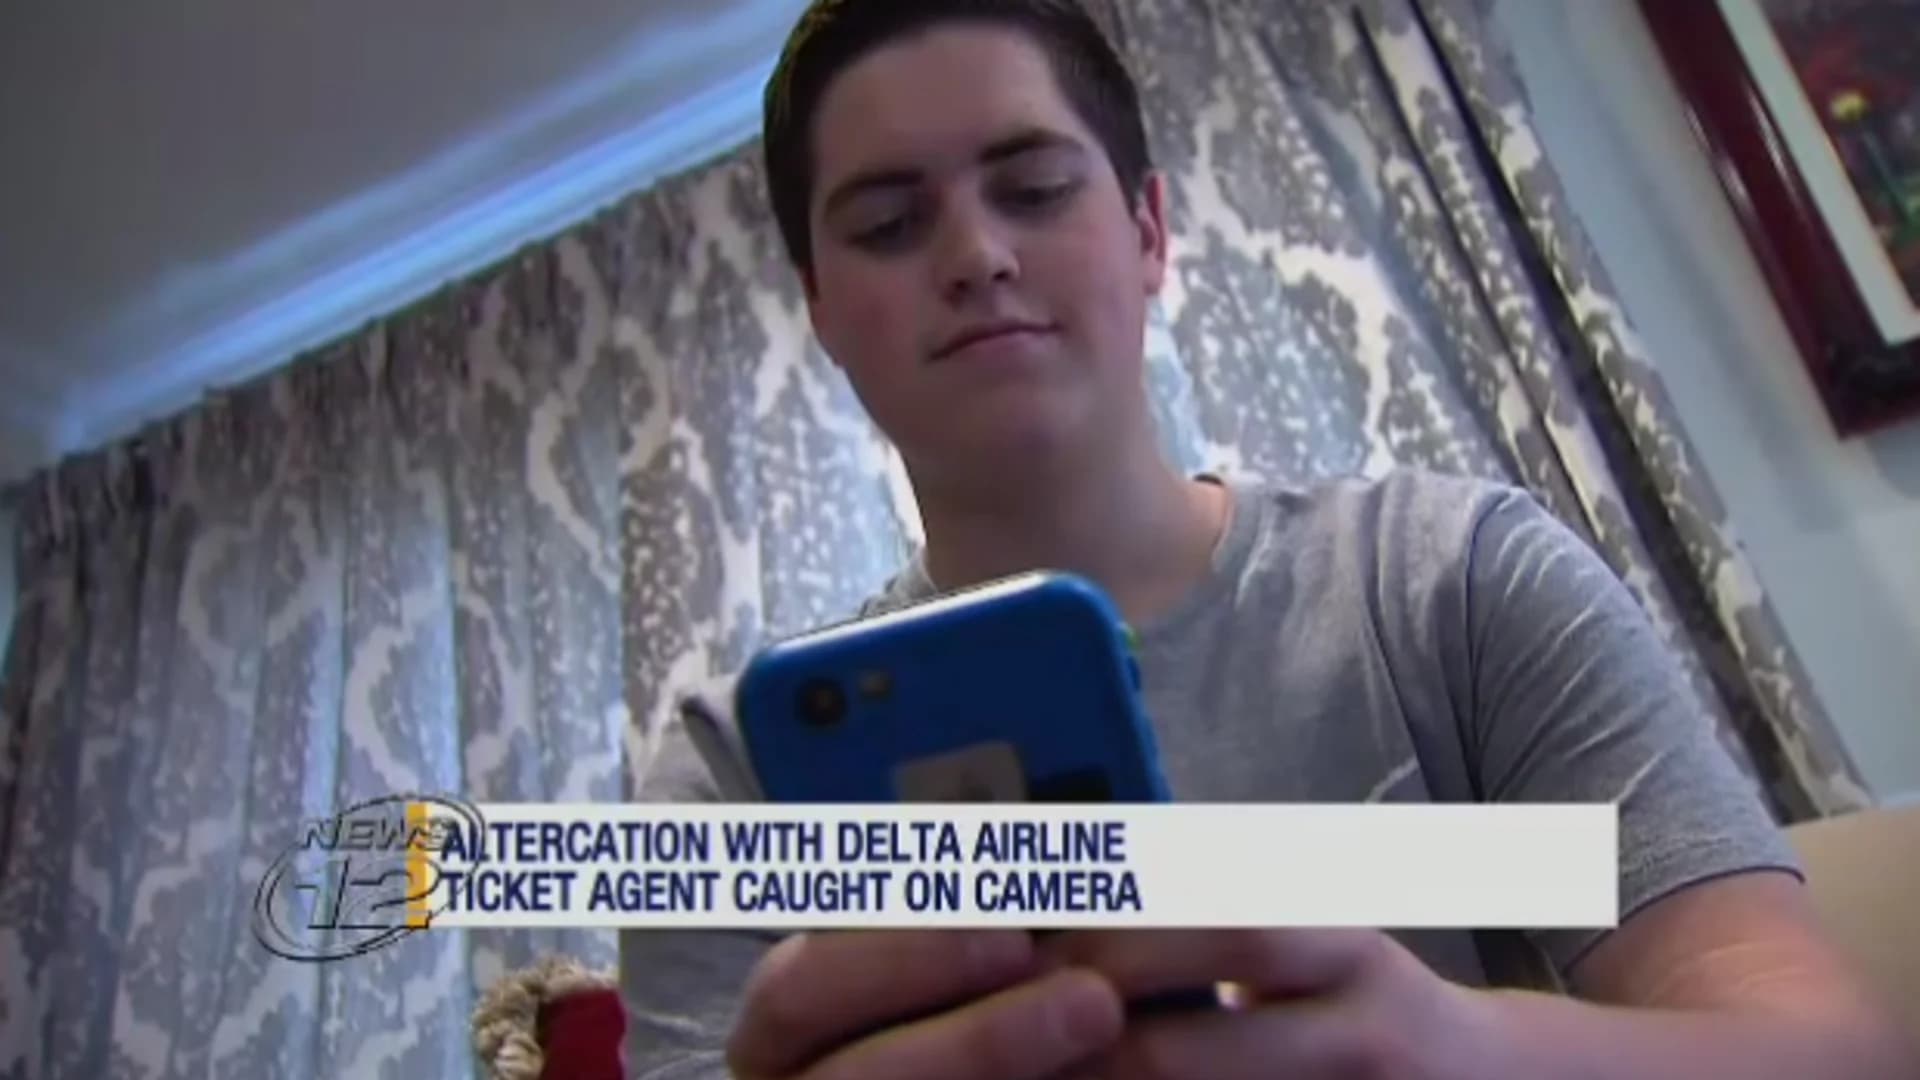 Suffern family sues Delta, says ticket agent hit teen son